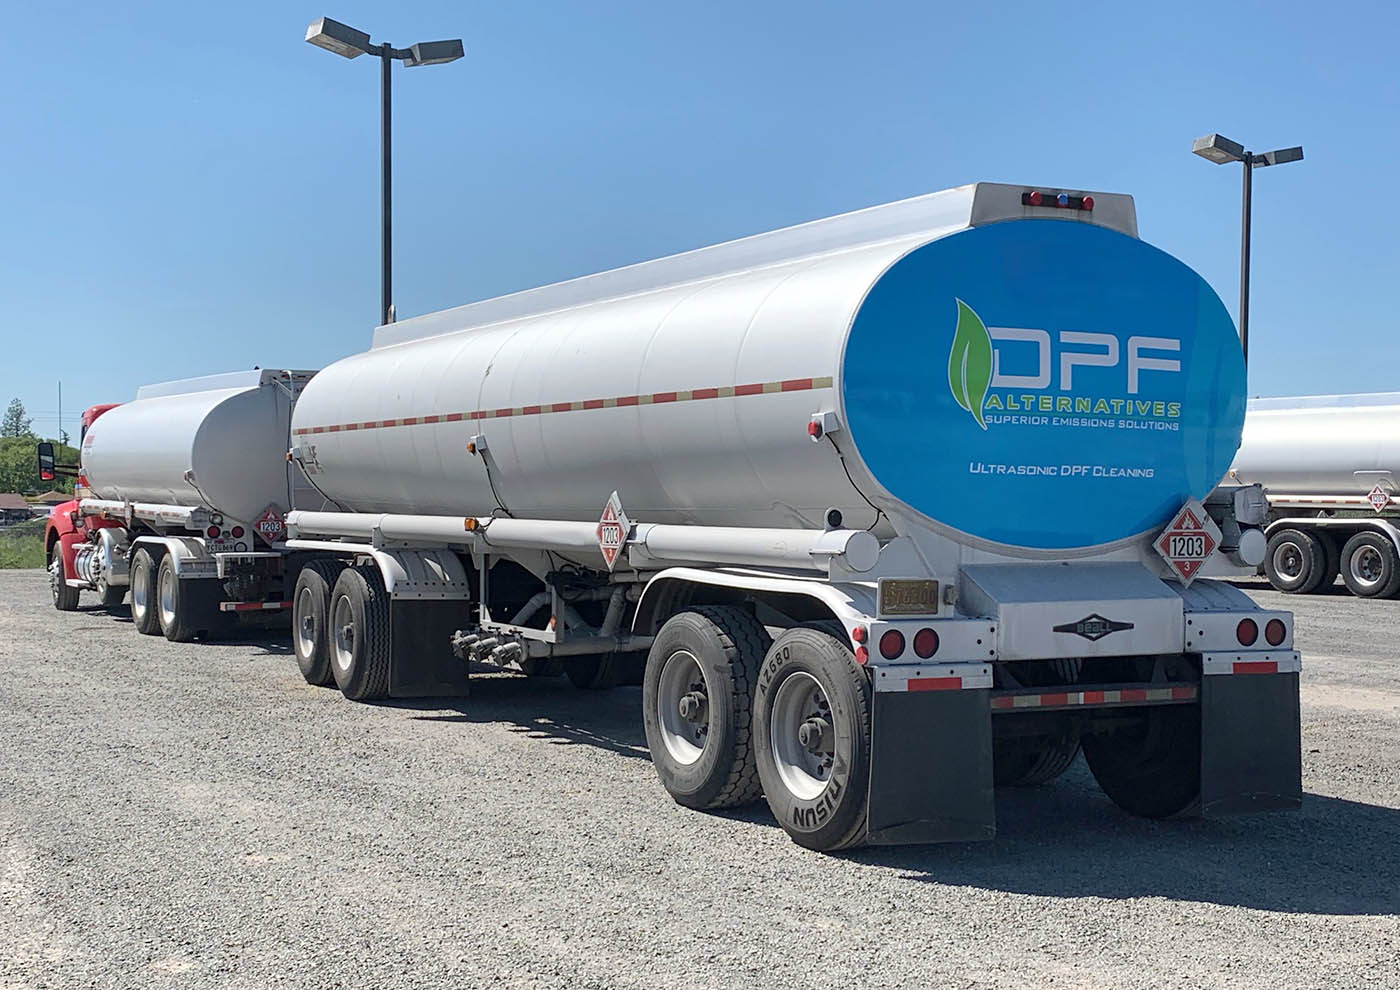 Back of a clean, large, reflective semi truck rig, contact DPF Alternatives for a DPF cleaning in Fort Myers.